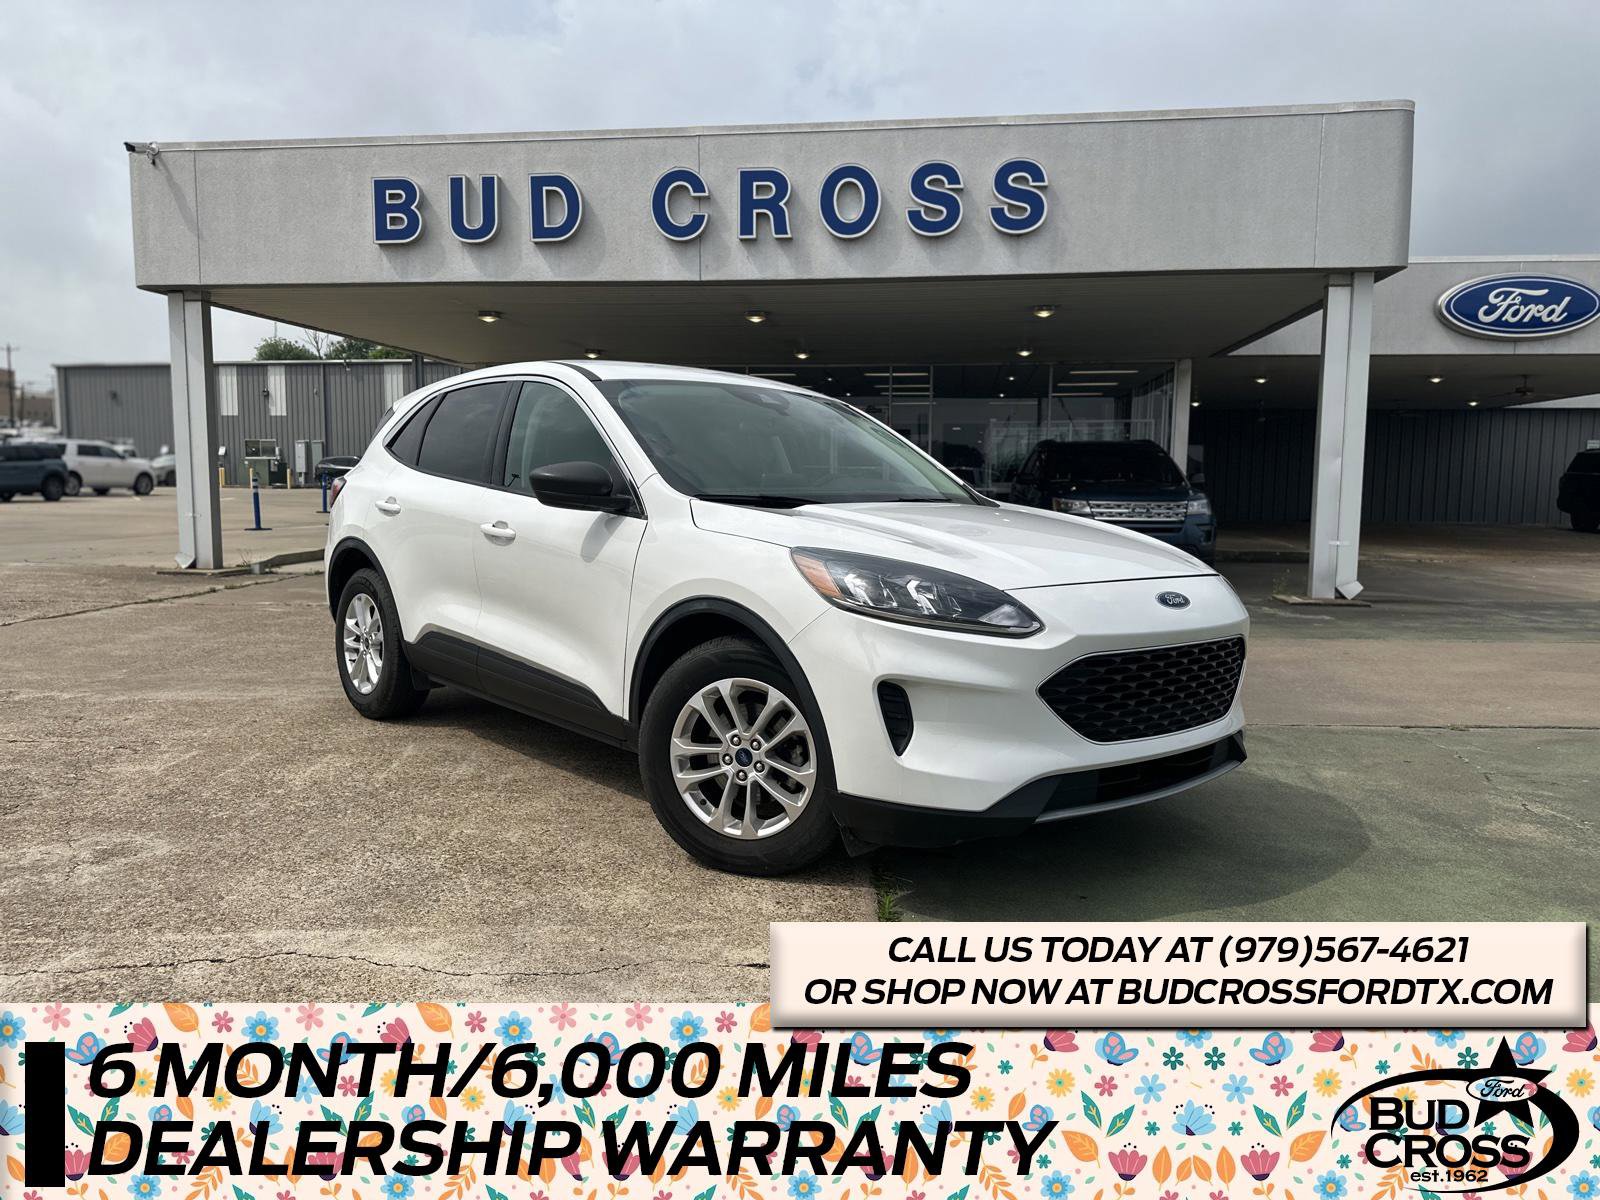 Used Ford Escape for Sale Near Me in College Station, TX - Autotrader